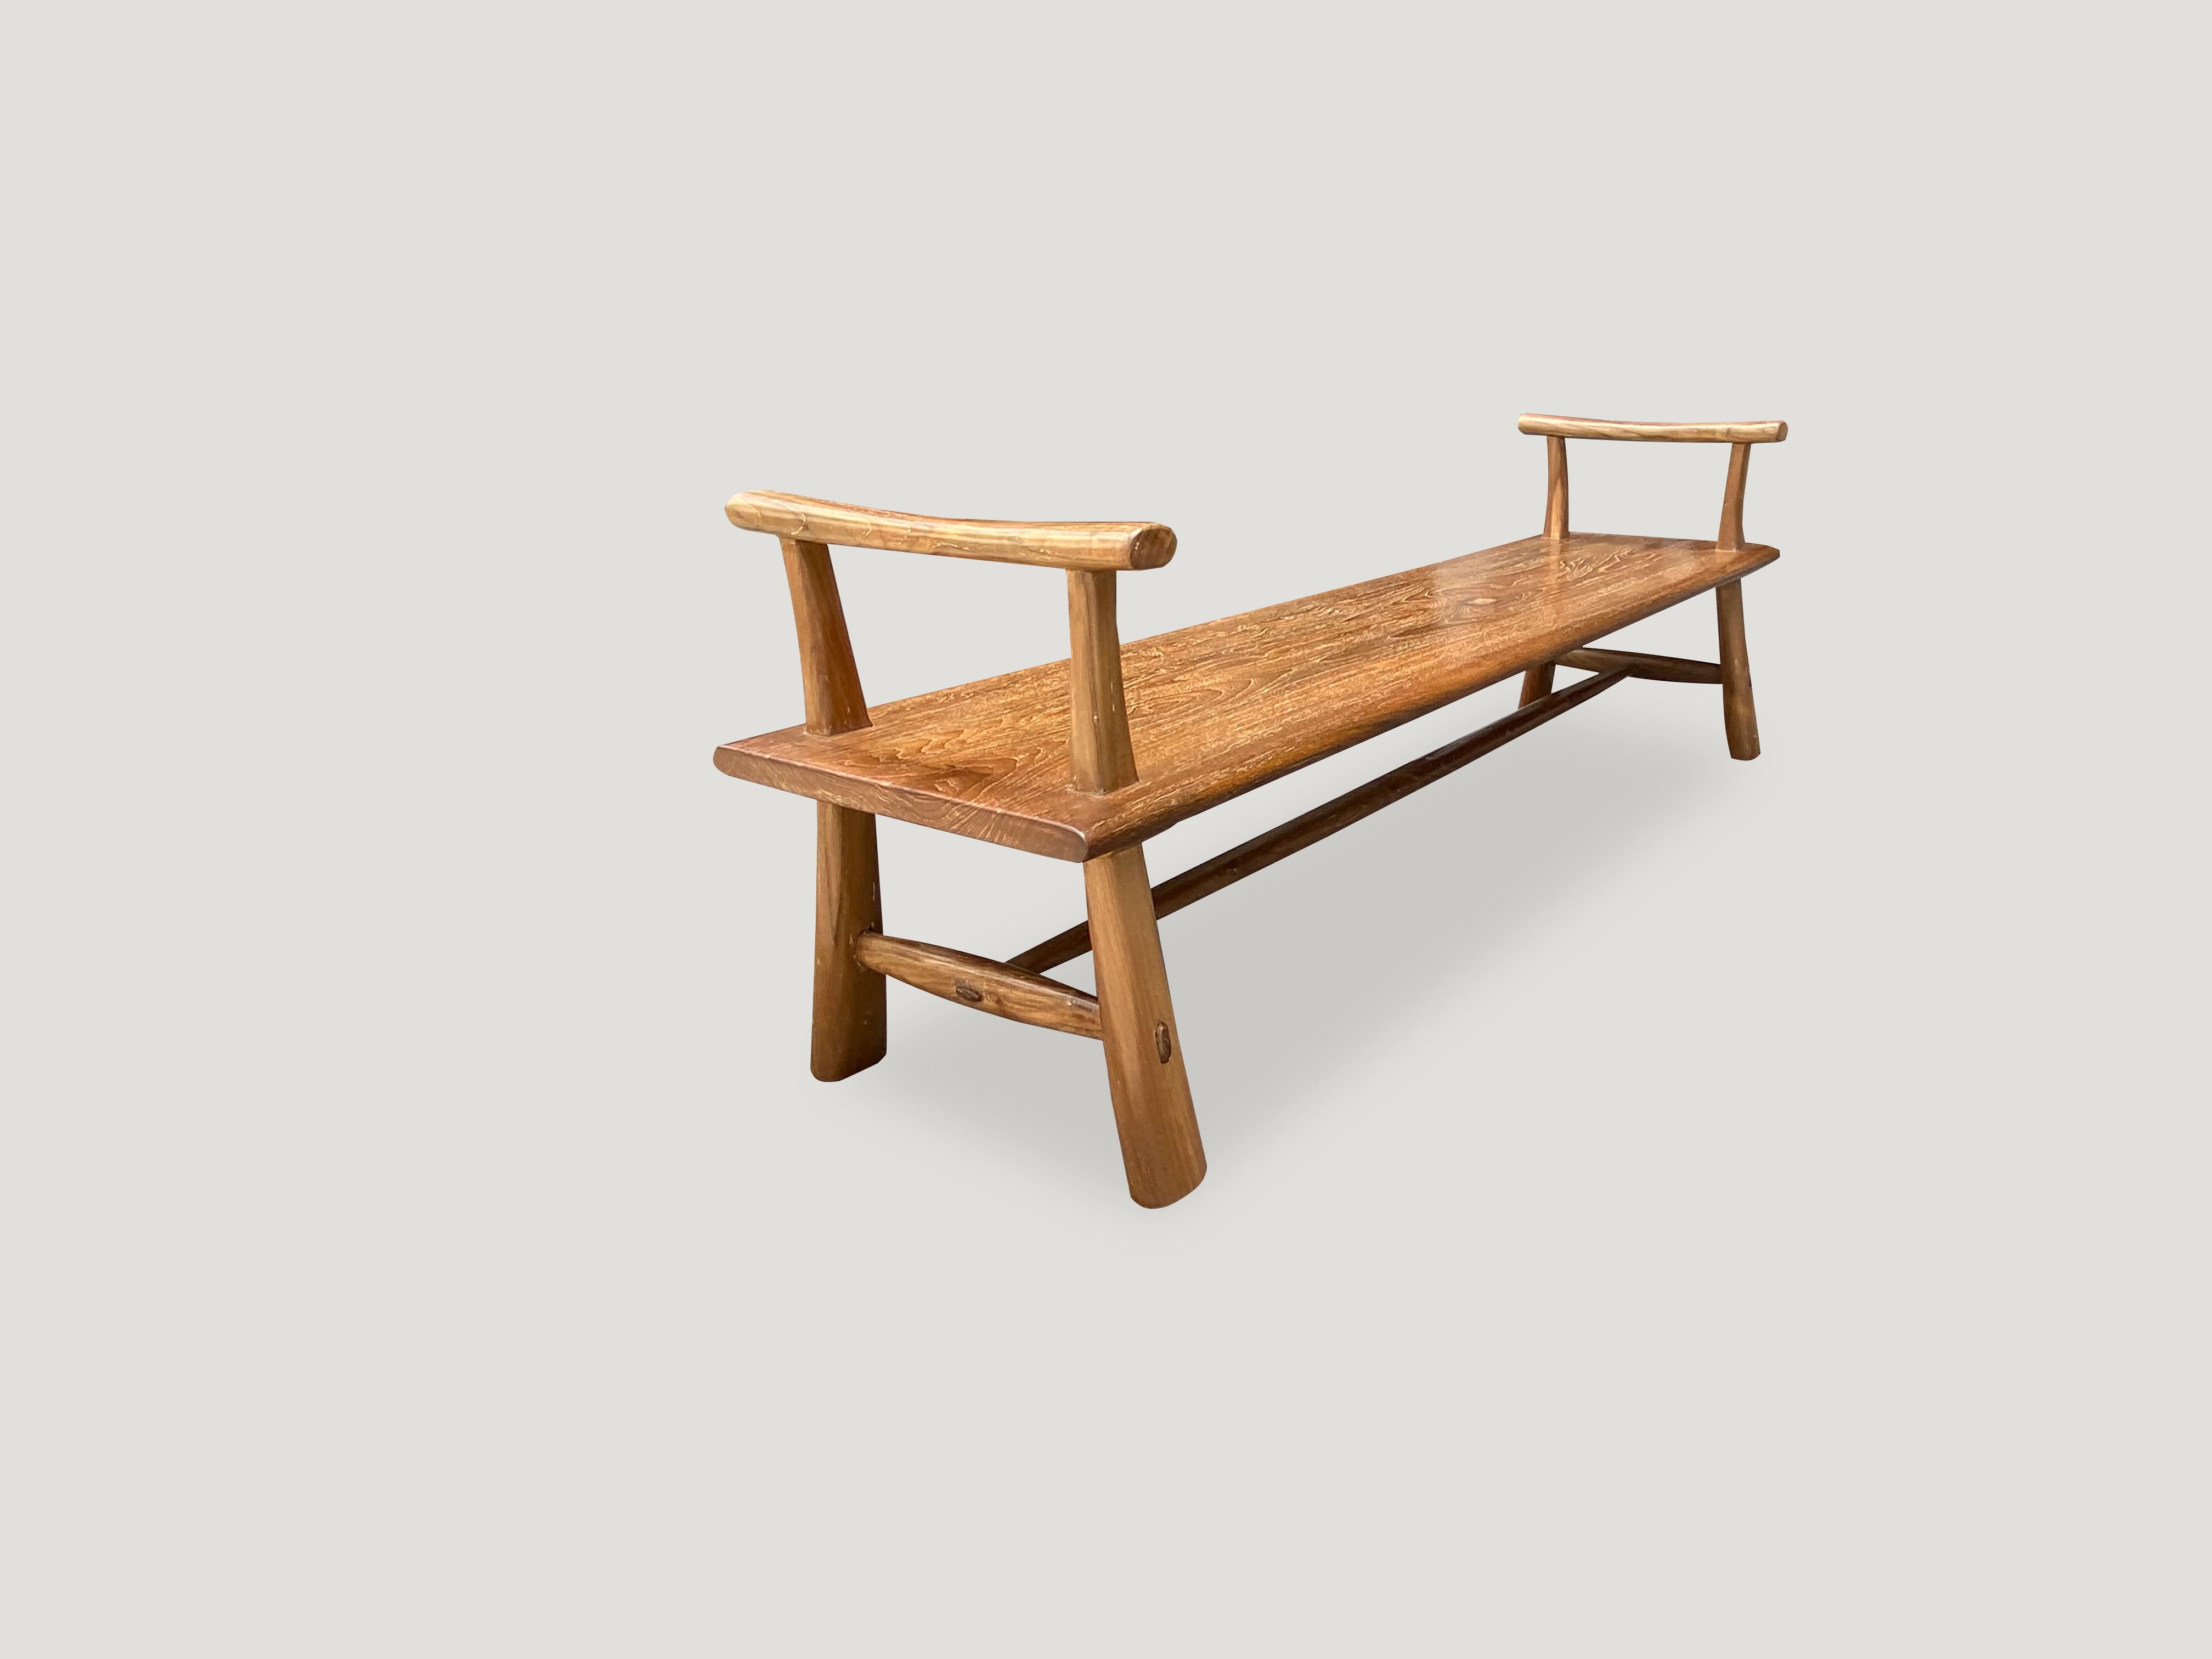 Andrianna Shamaris Midcentury Couture Teak Wood Bench with Arms For Sale 1